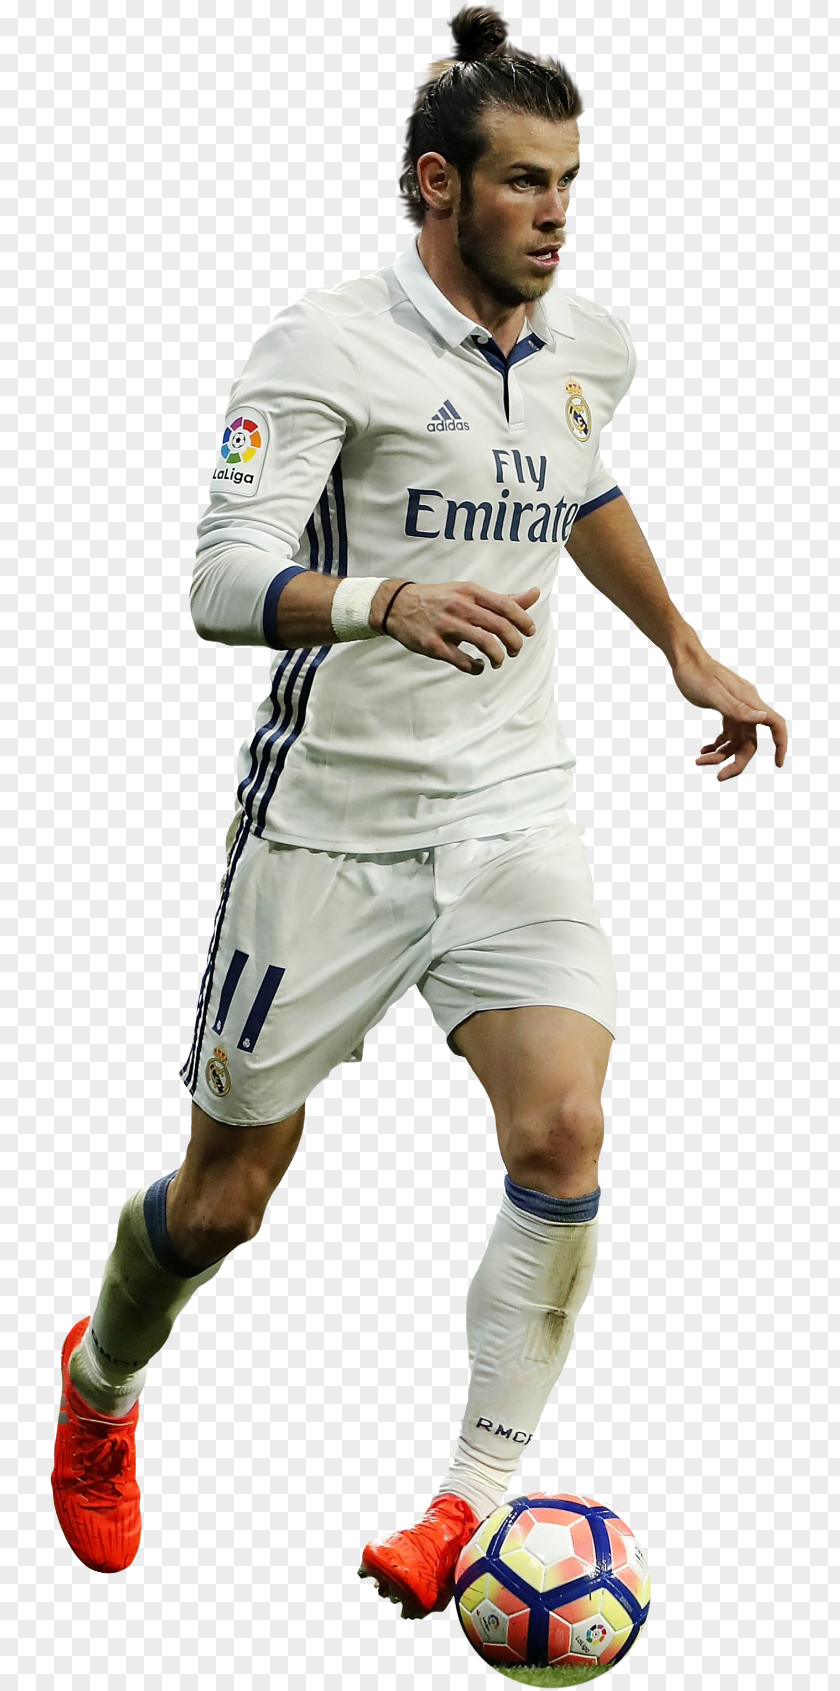 Football Gareth Bale Real Madrid C.F. Player Sports PNG